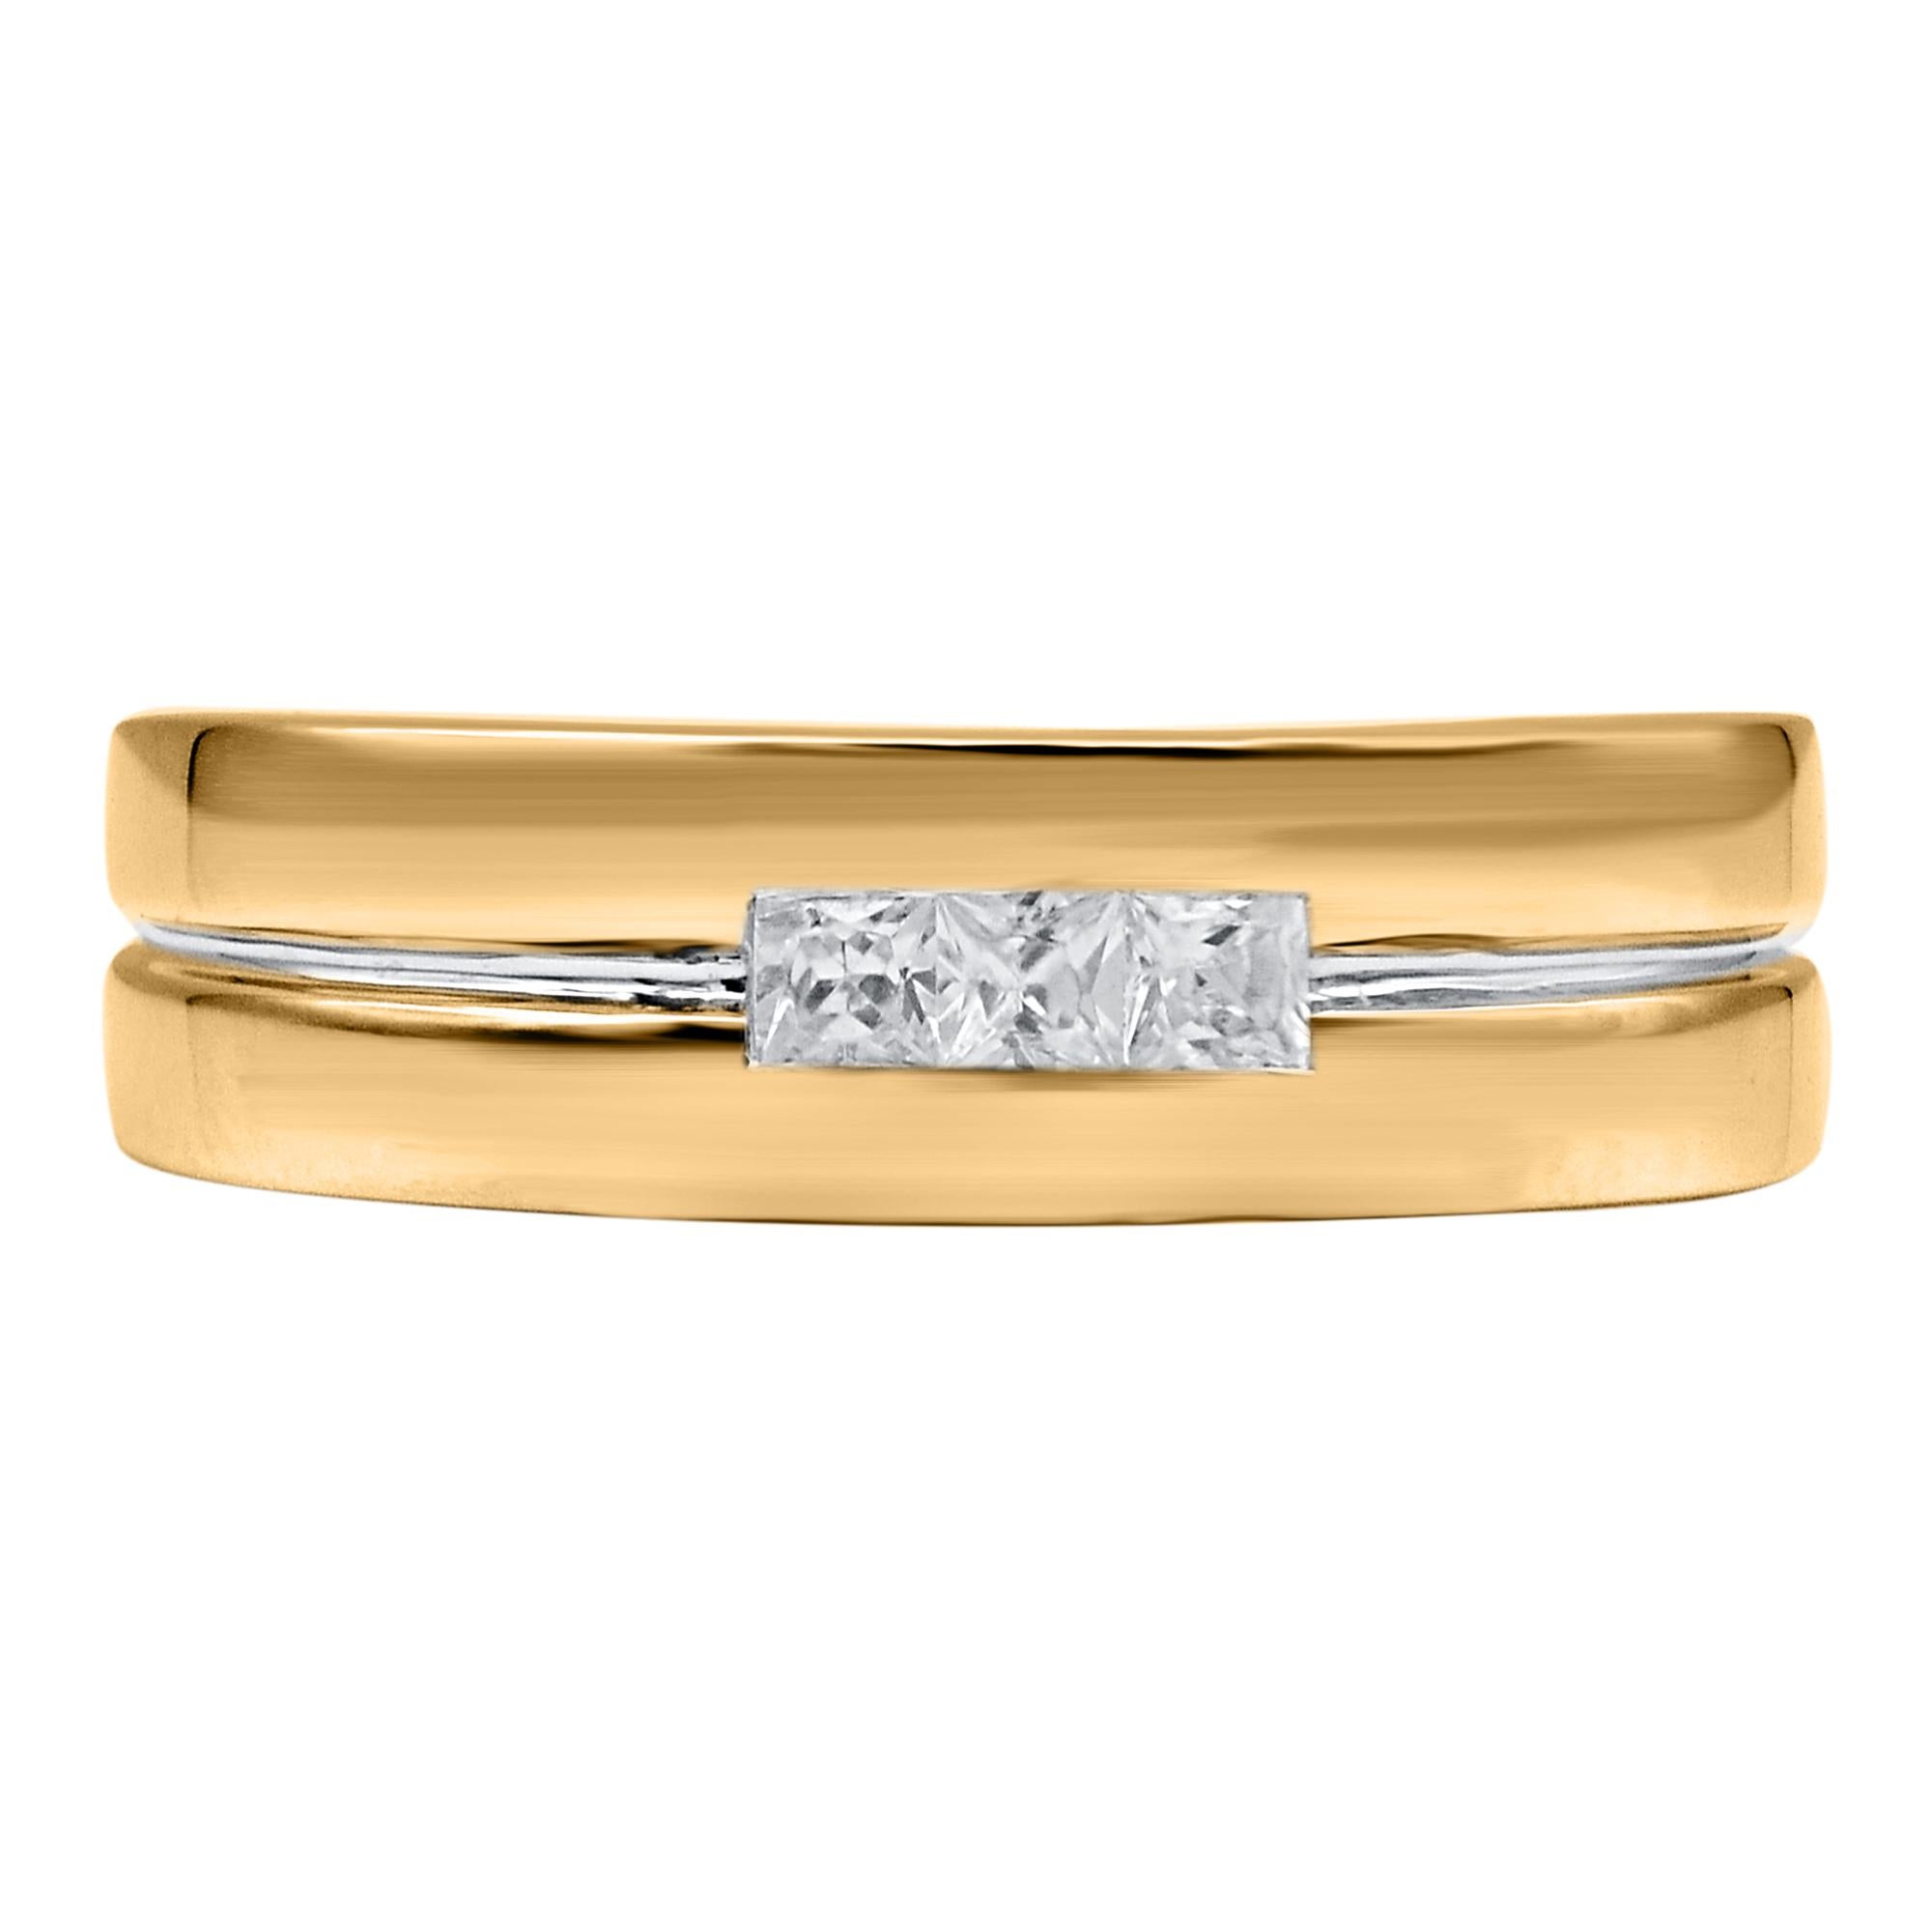 Contemporary TJD 0.30 Carat Princess Cut Diamond 14KT Yellow Gold 3 Stone Men's Band Ring For Sale